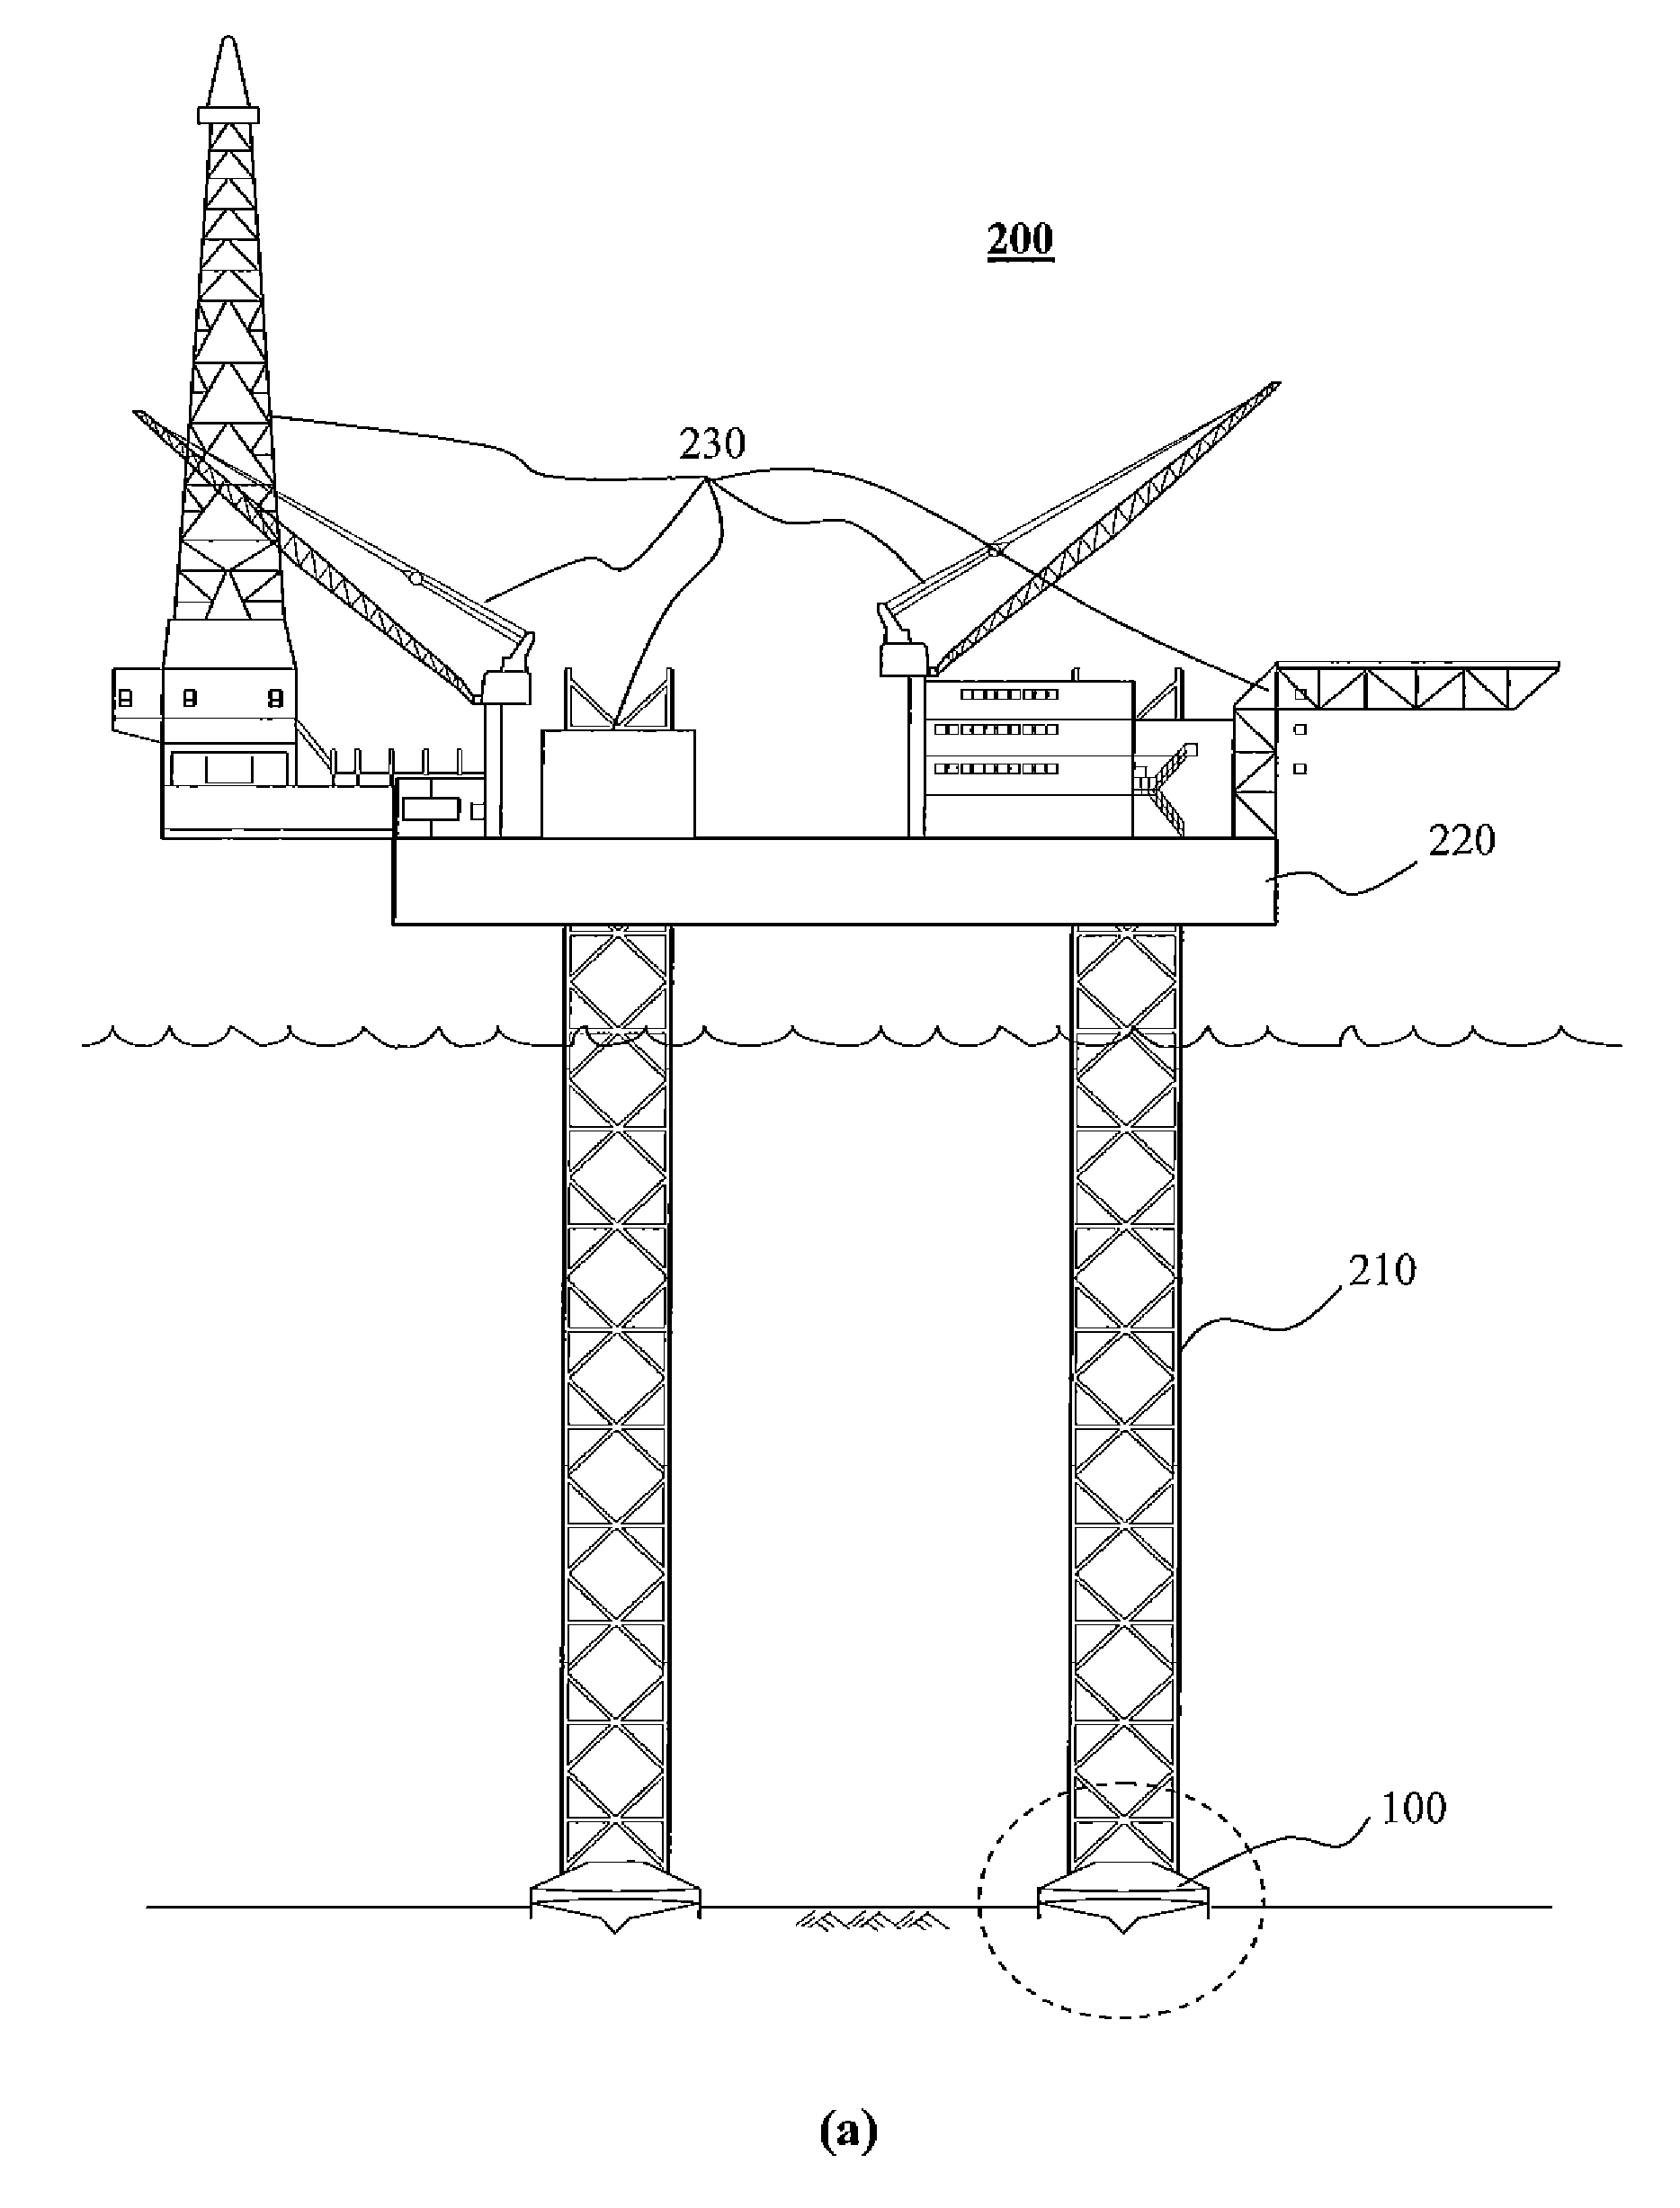 Modified Spudcan With Optimal Peripheral Skirt For Enhanced Performance Of Jackup Operations